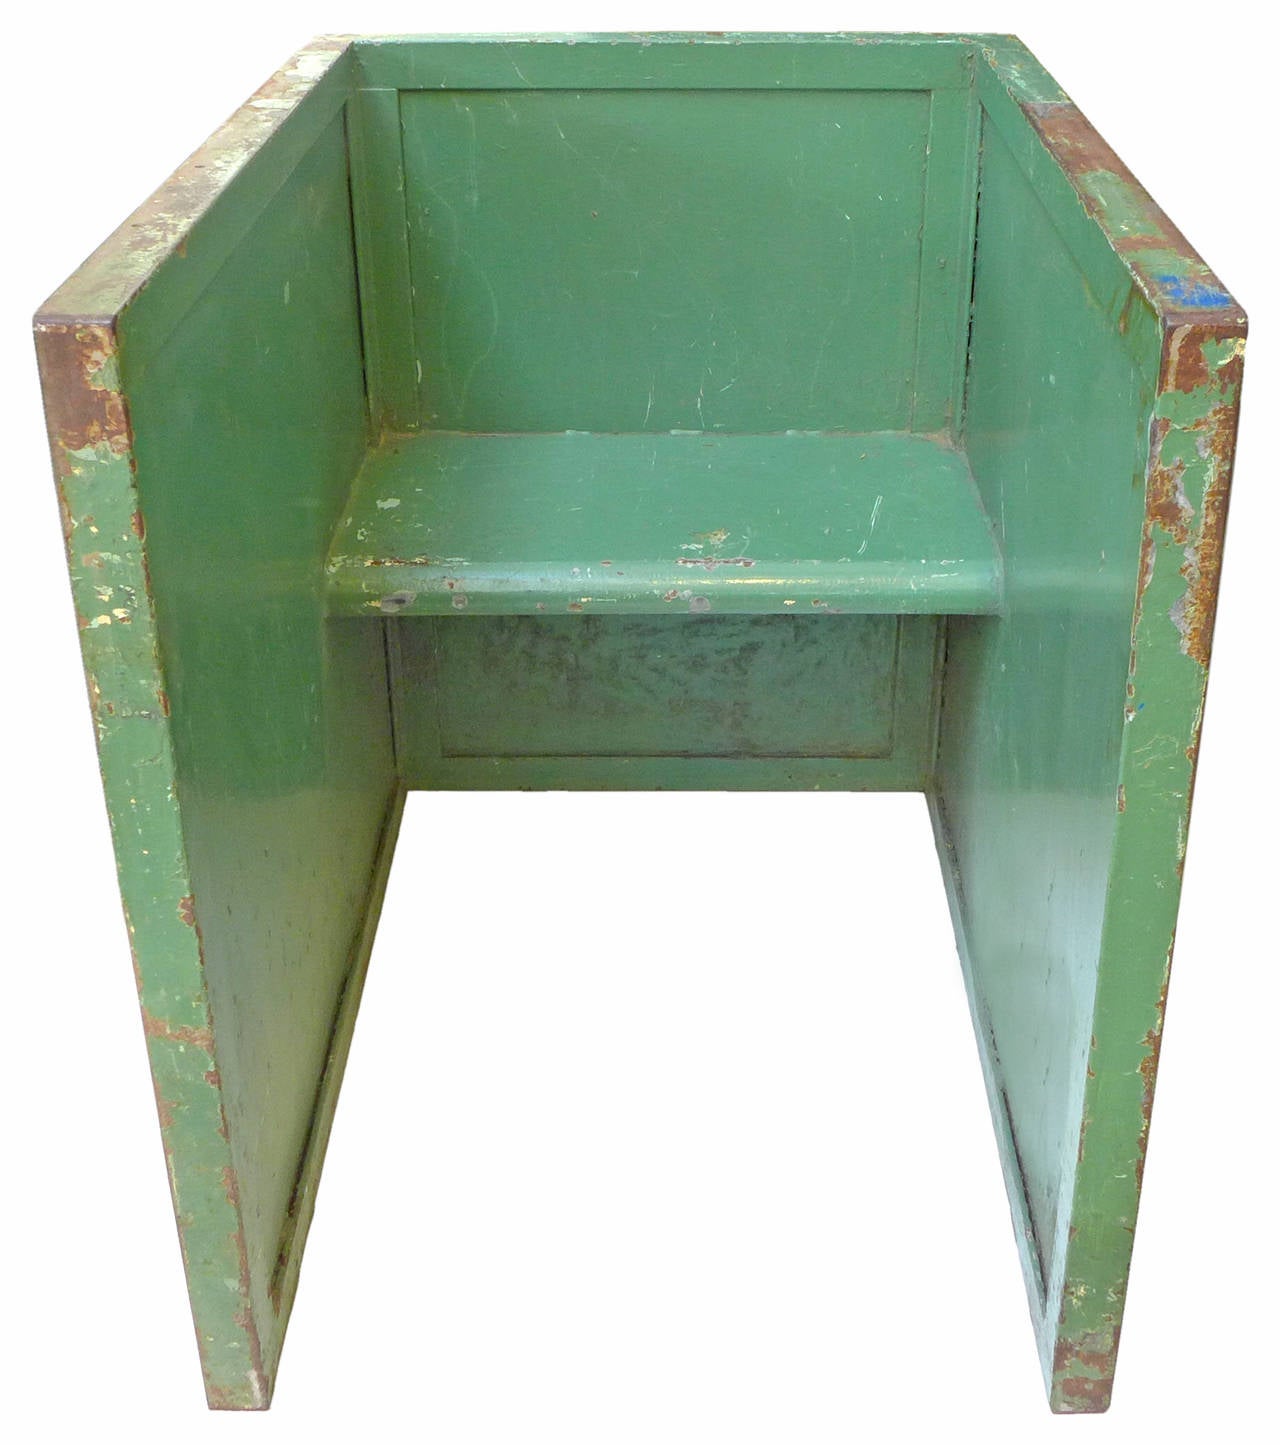 A monumental, welded-steel lounge chair of exceptional scale and form:  expertly constructed and thoroughly rectilinear; a strong, architectural simplicity evoking the work of Donald Judd.  A seemingly private environment is created due to an